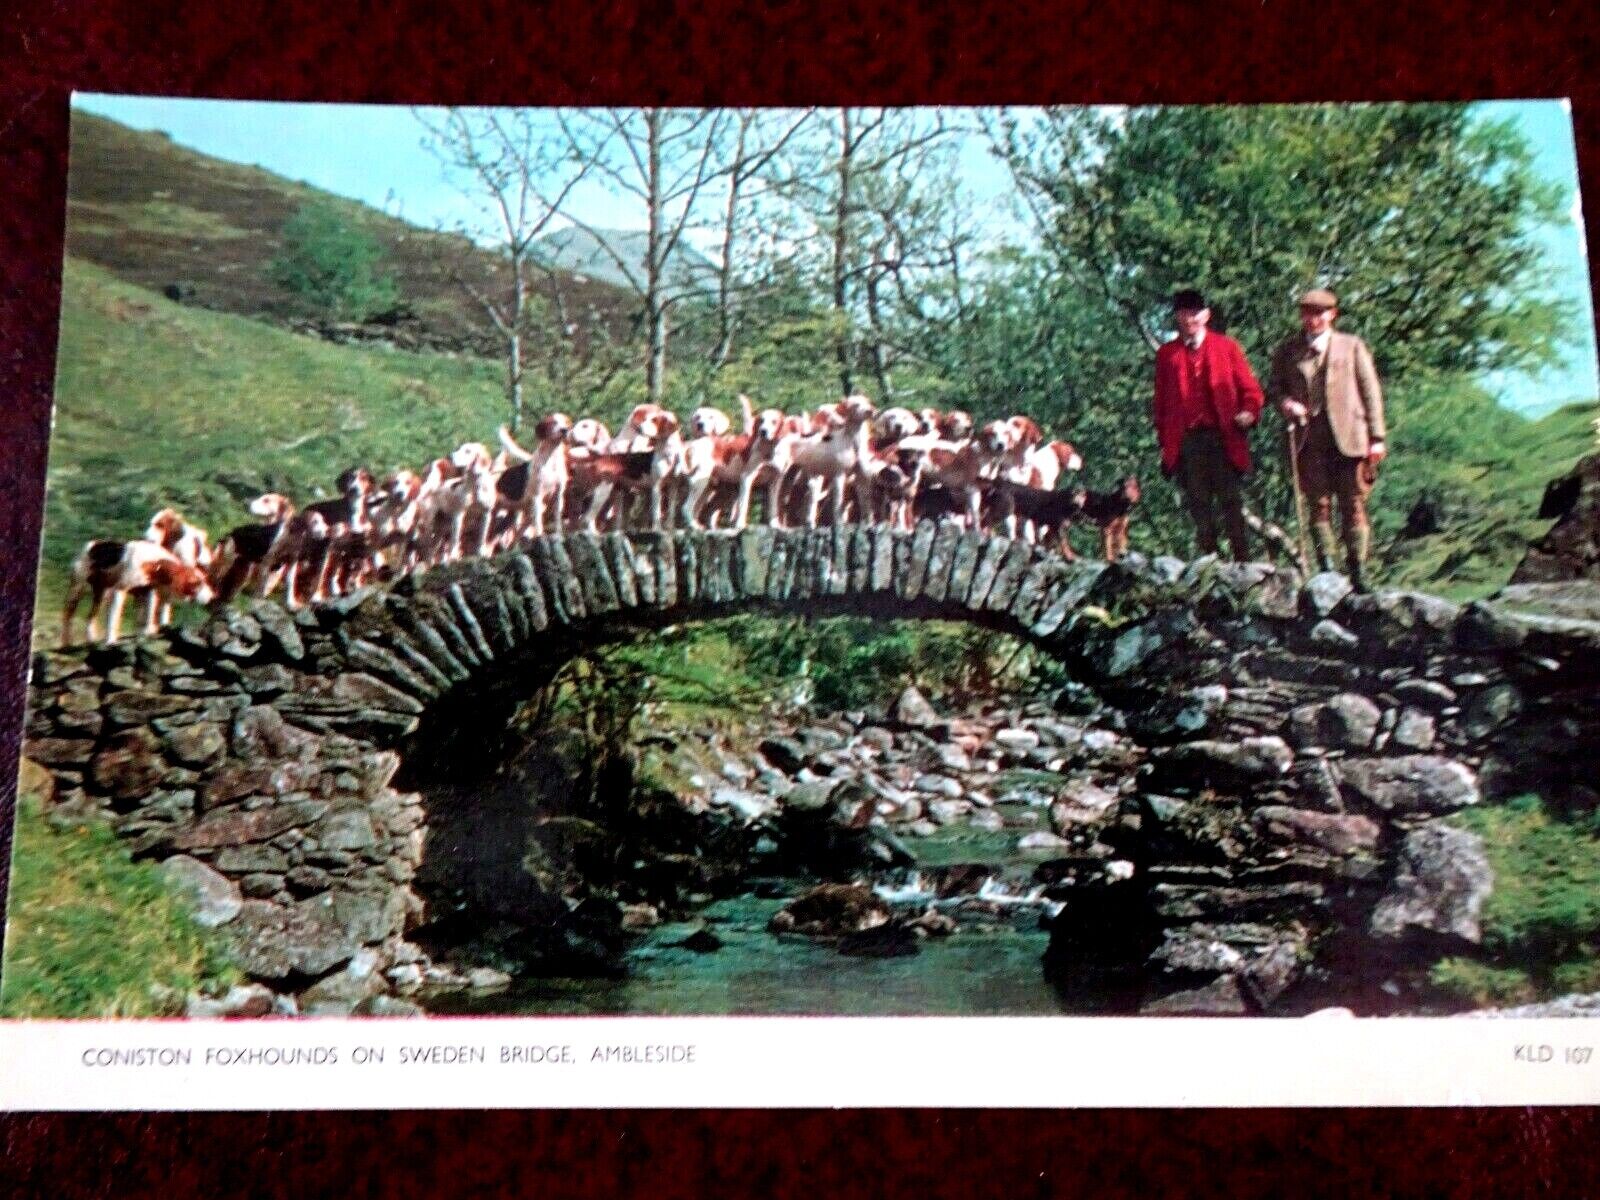 House Clearance - CONISTON POSTCARD, UNPOSTED, FOXHOUNDS ON SWEDEN BRIDGE, AMBLESIDE.